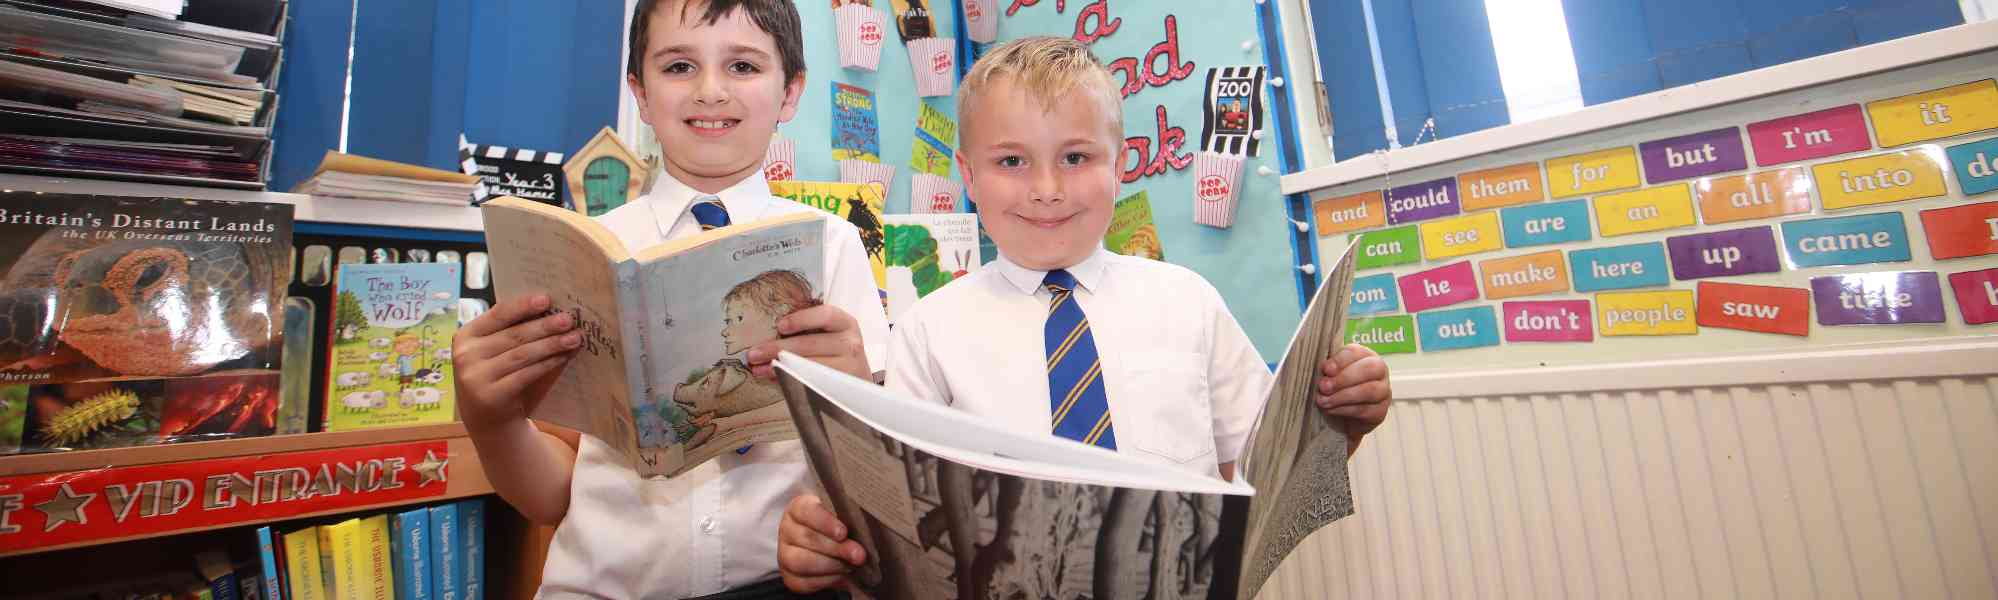 Pupils at Radcliffe Hall Primary School